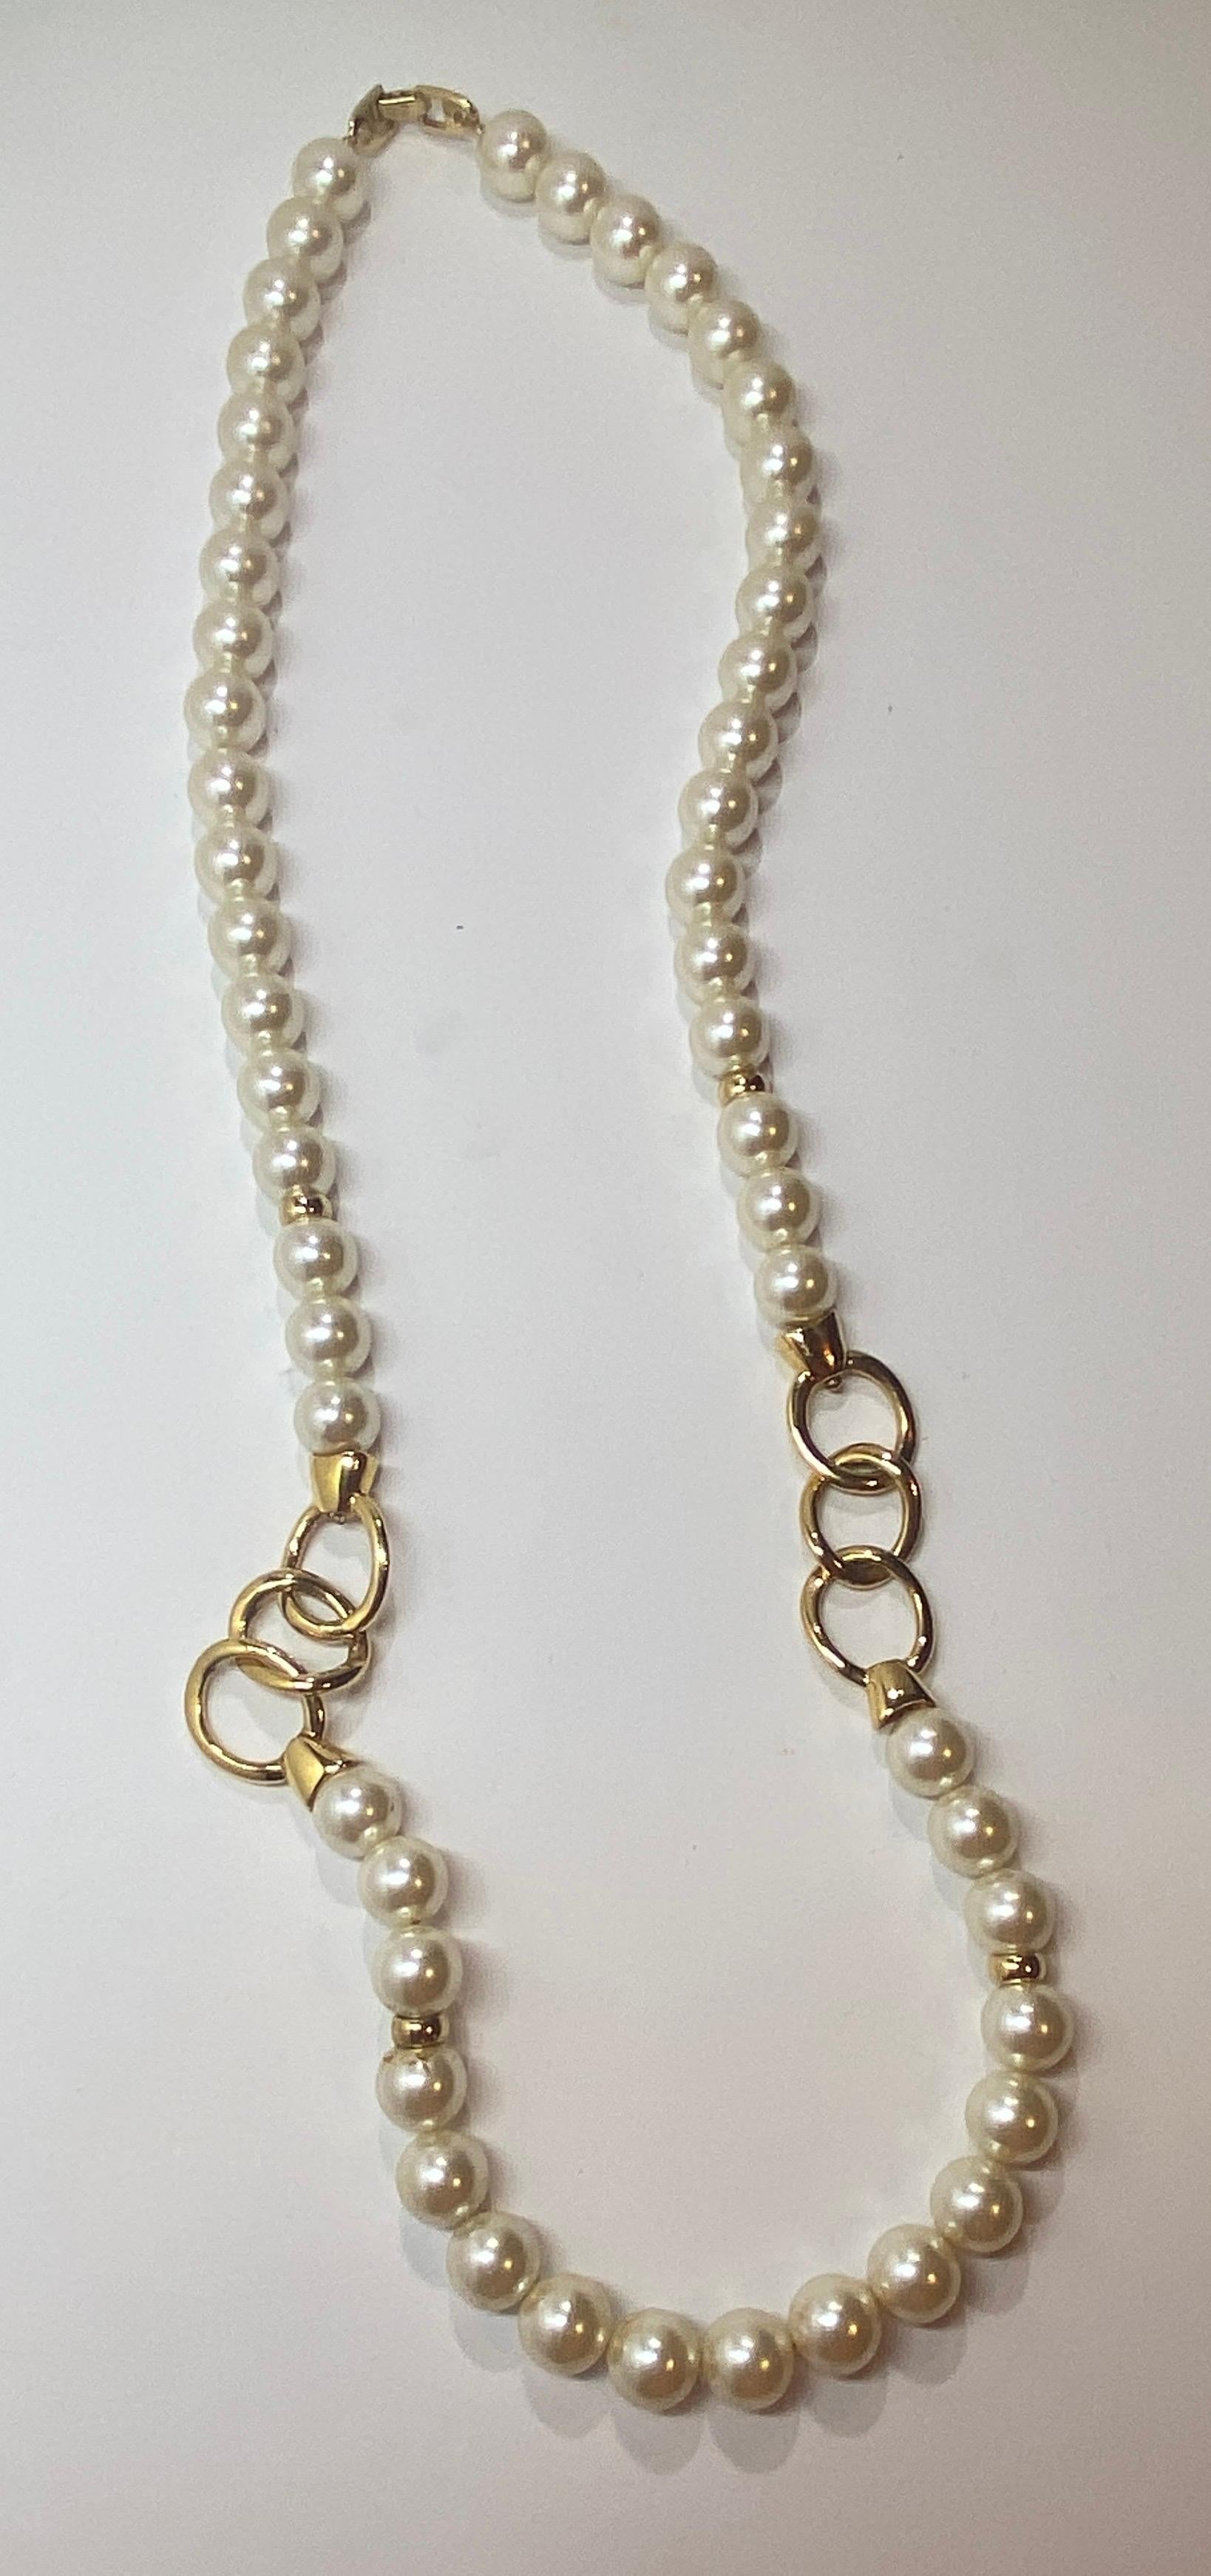 Napier's wonderfully elegant yet whimsical costume pearl, which measures 1/2 inch in circumference accented with polished gold hardware chain-link necklace, measures 30 inches in total length. The clasp is of polished gold hardware as well. Made in